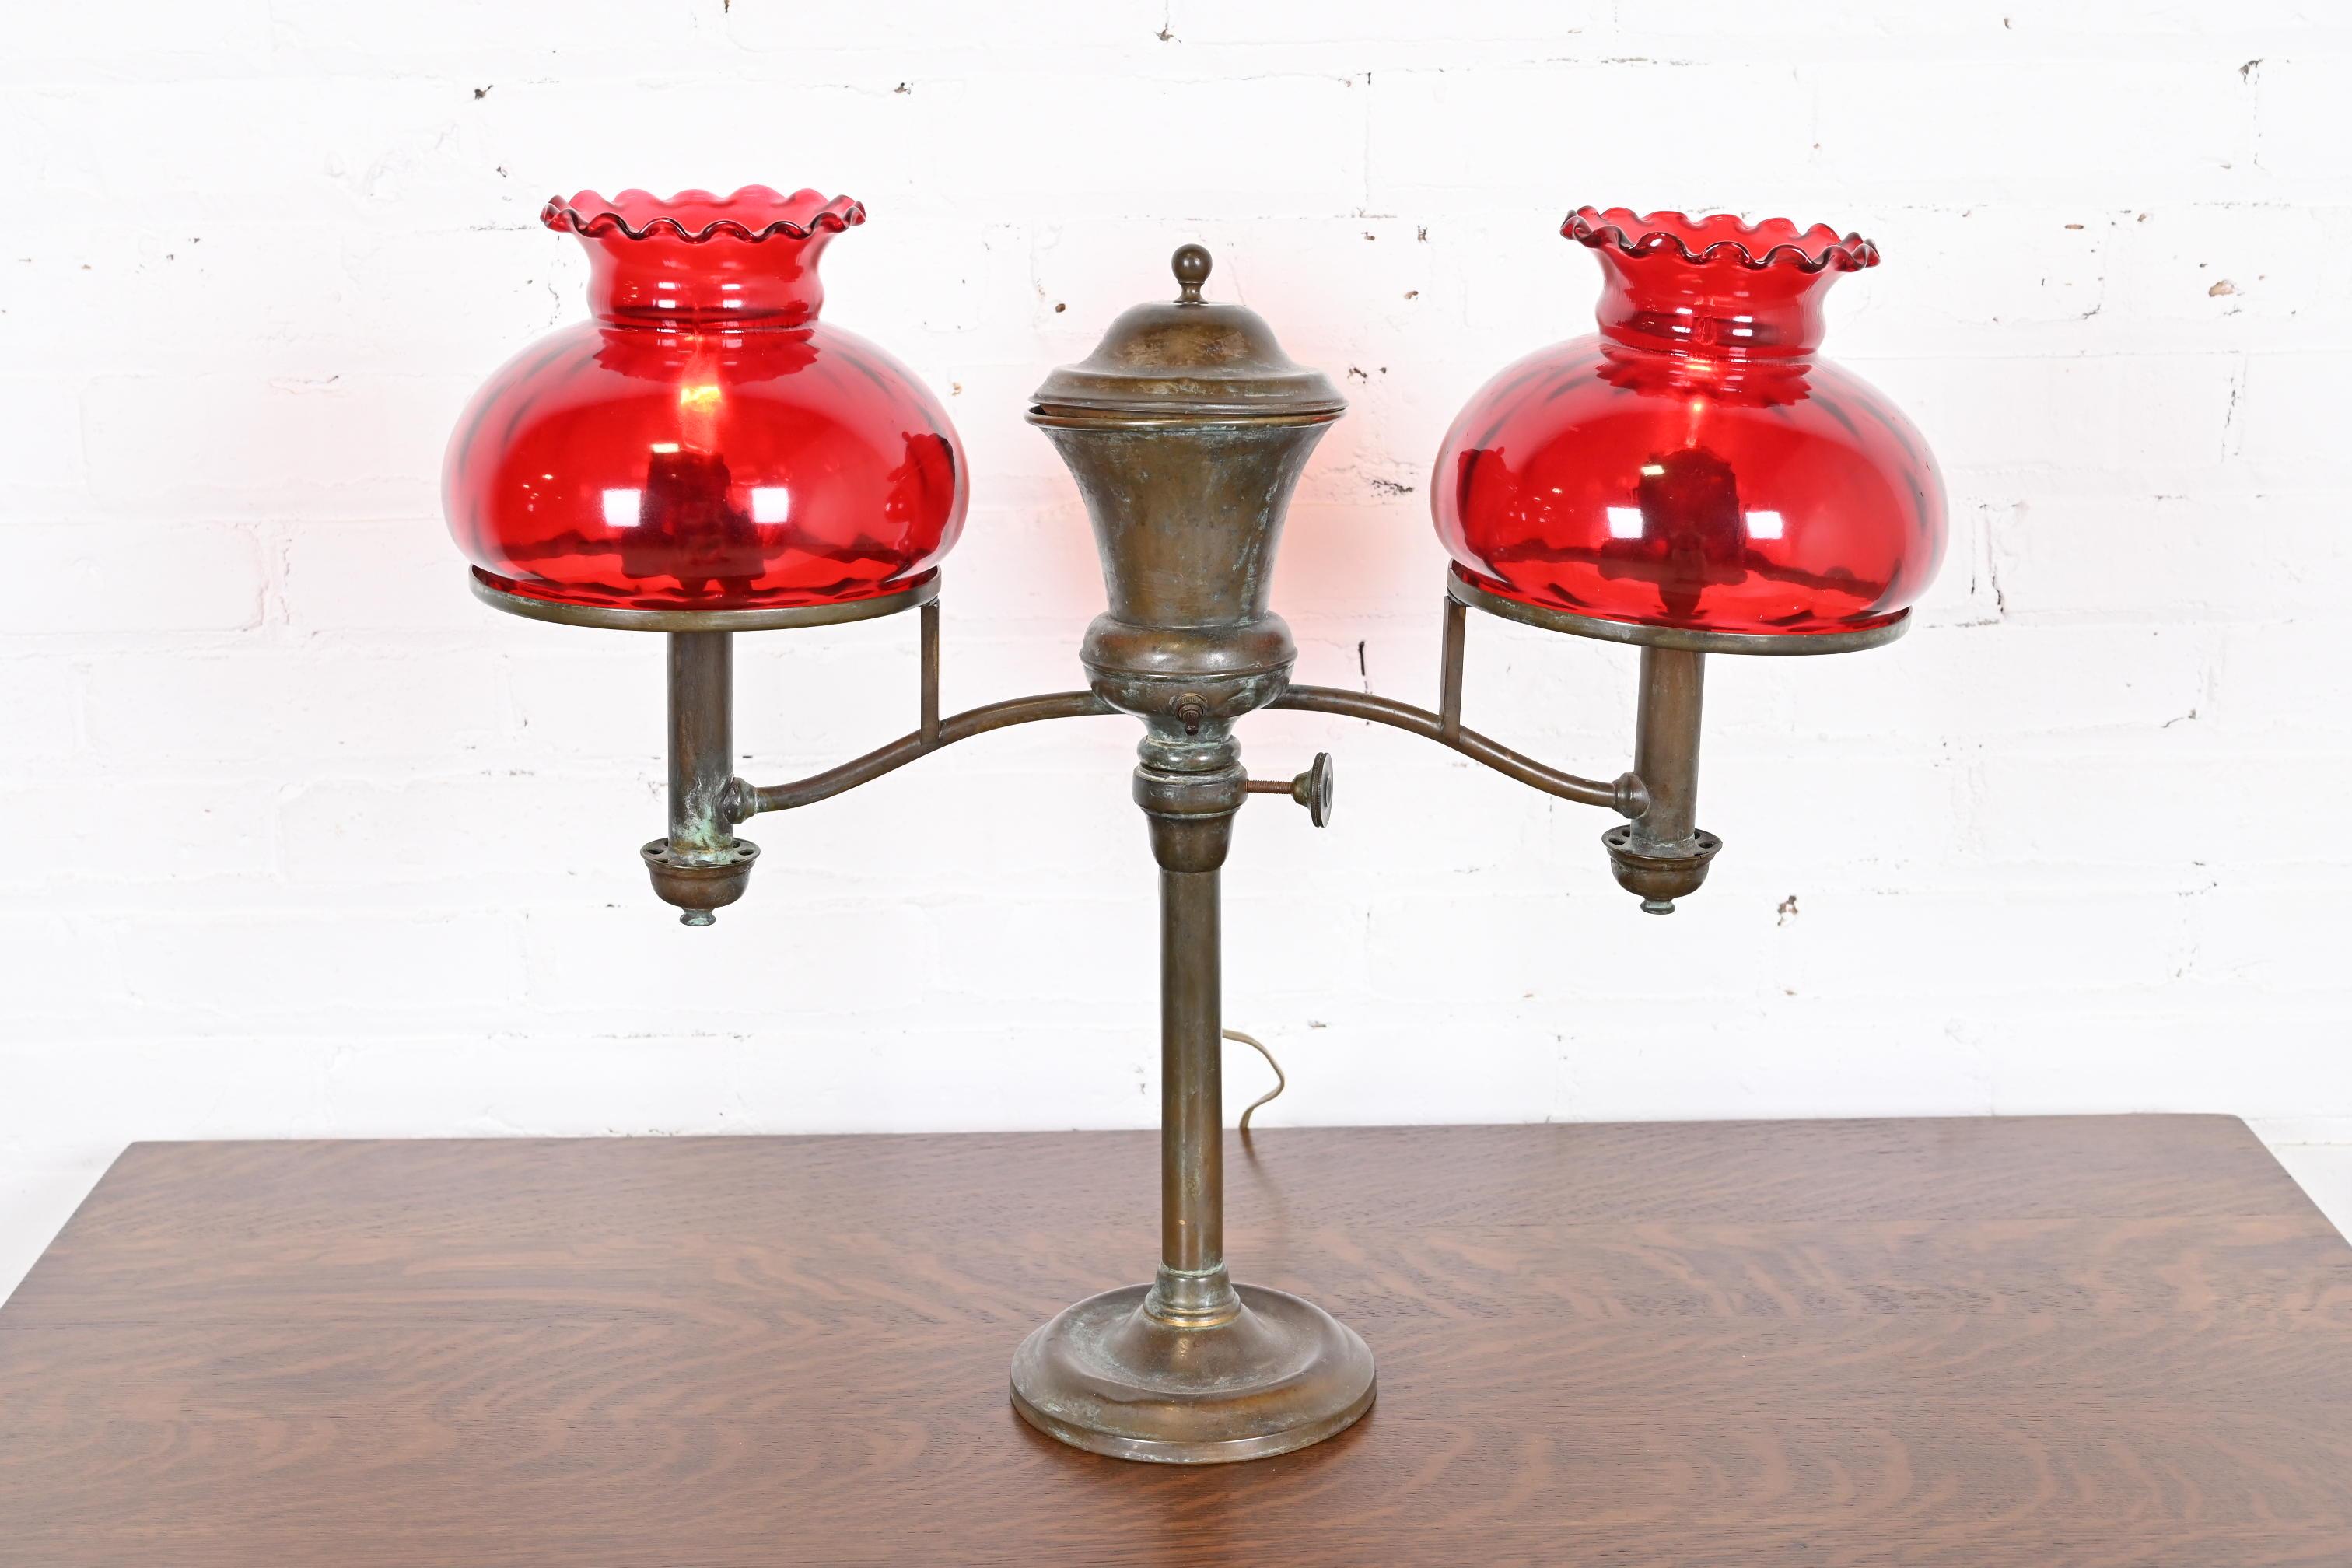 An outstanding Arts & Crafts or Art Deco period double arm student desk lamp

By Hinrichs of New York and retailed by Tiffany & Co.

New York, USA, Late 19th Century

Bronze, with beautiful red art glass shades.

Measures: 23